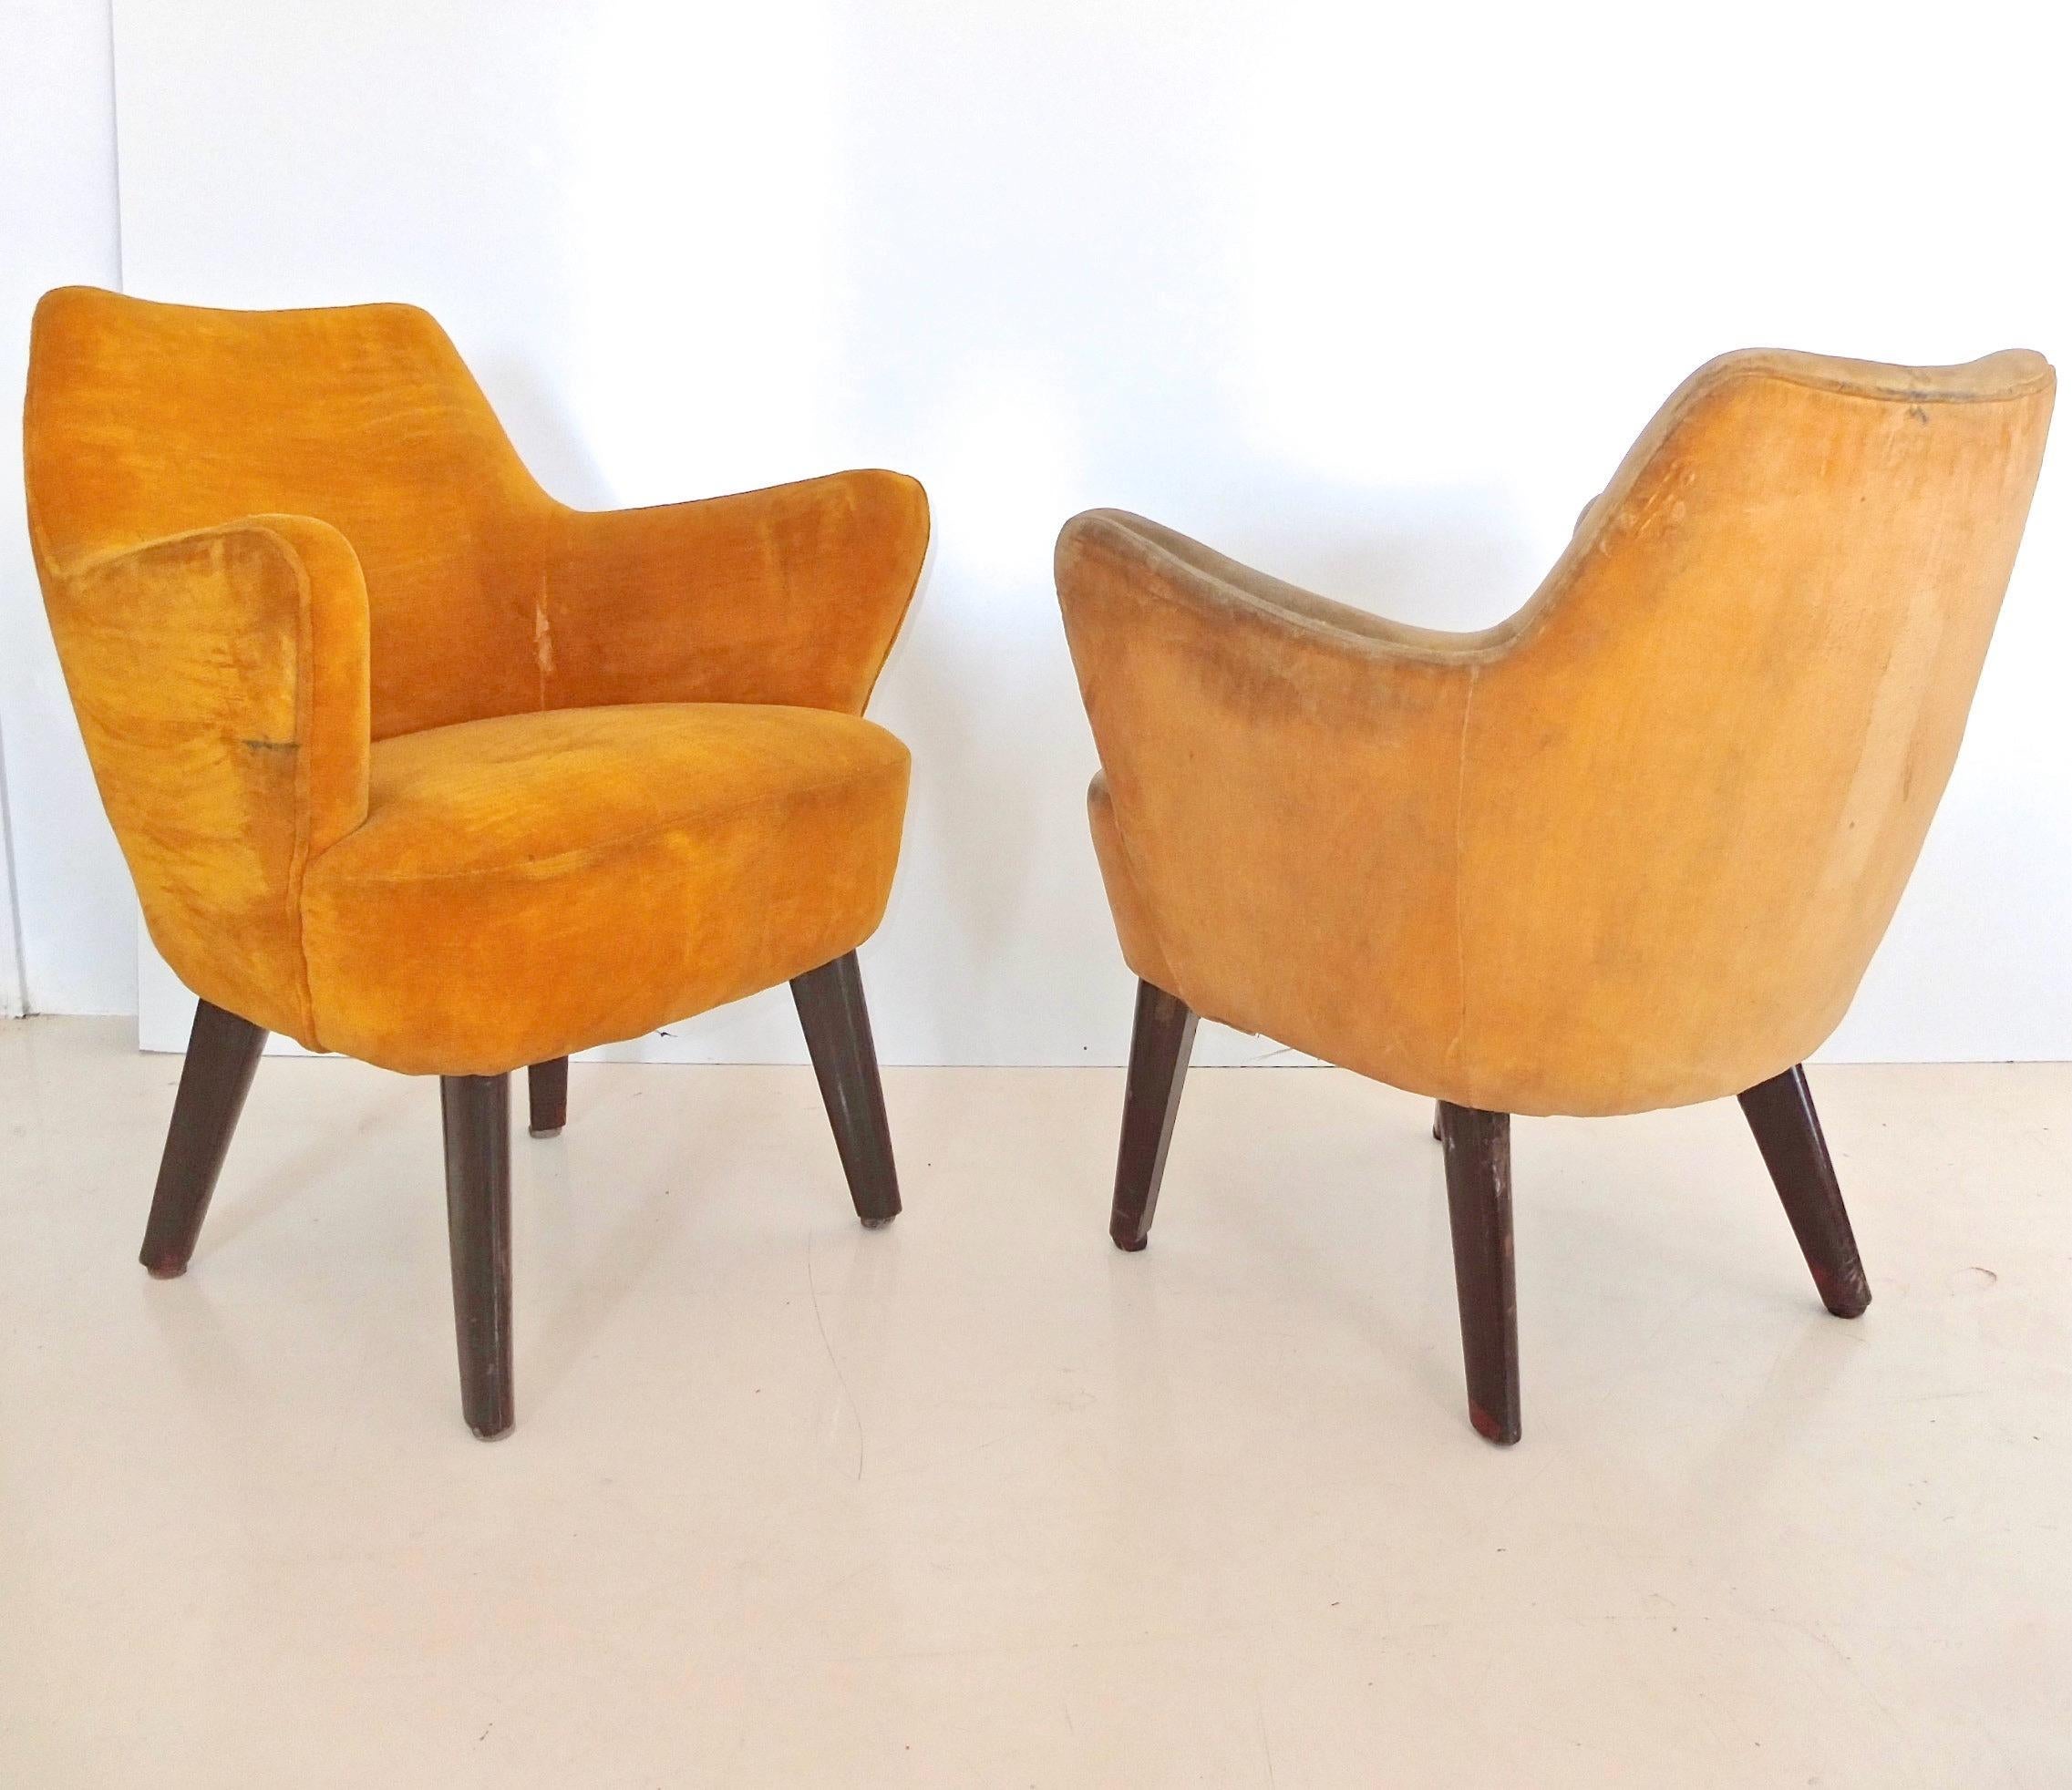 Gio Ponti Chairs from Augustus Ocean Liner First Class Bar 2